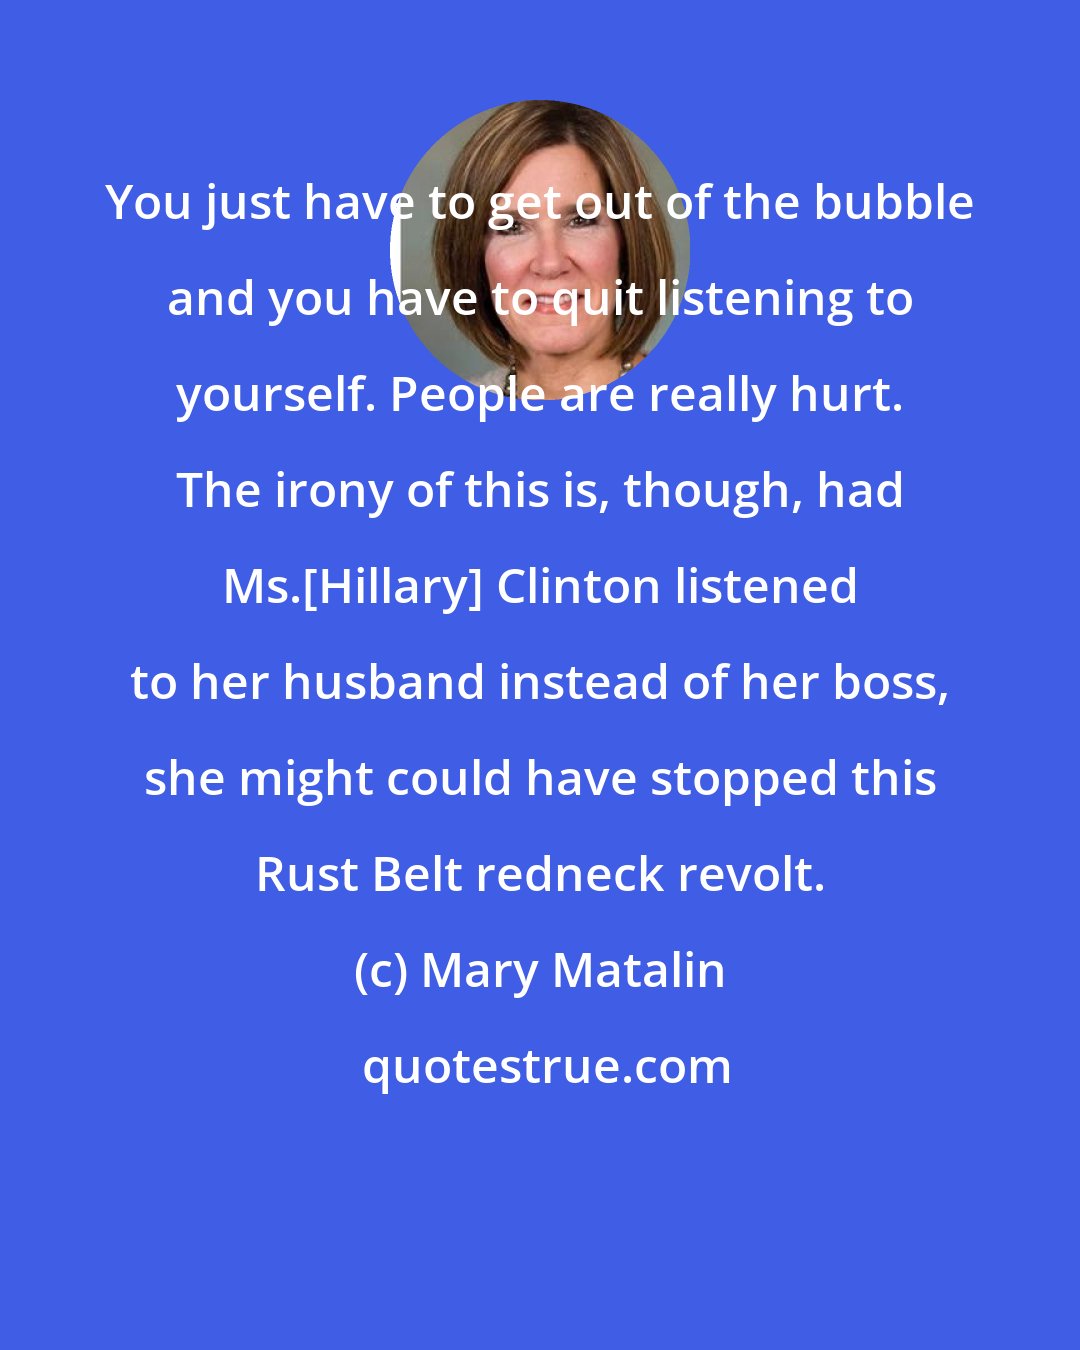 Mary Matalin: You just have to get out of the bubble and you have to quit listening to yourself. People are really hurt. The irony of this is, though, had Ms.[Hillary] Clinton listened to her husband instead of her boss, she might could have stopped this Rust Belt redneck revolt.